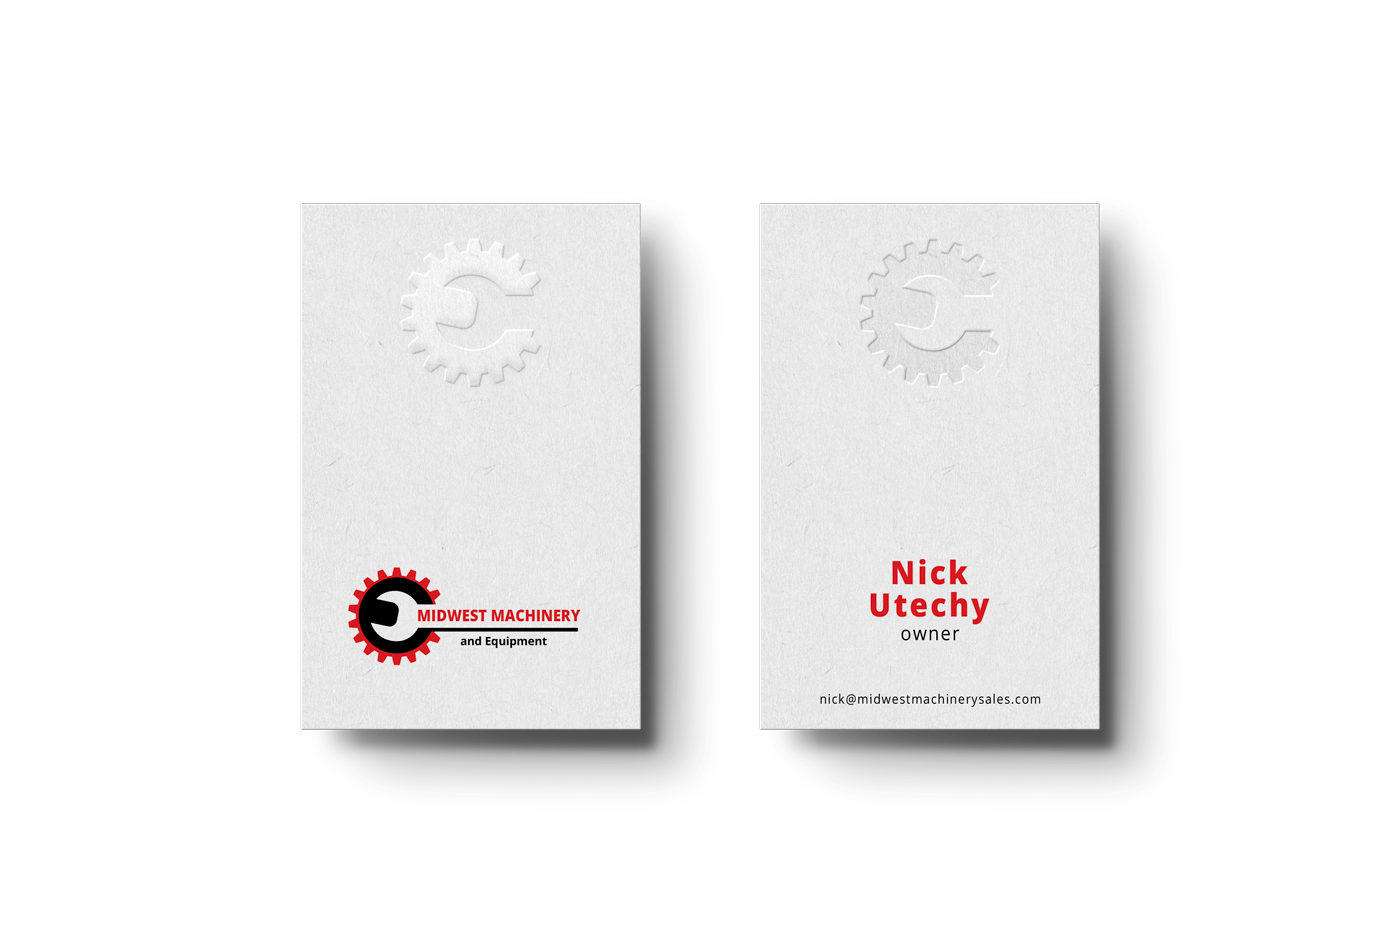 Mockup of business cards for Midwest Machinery and Equipment